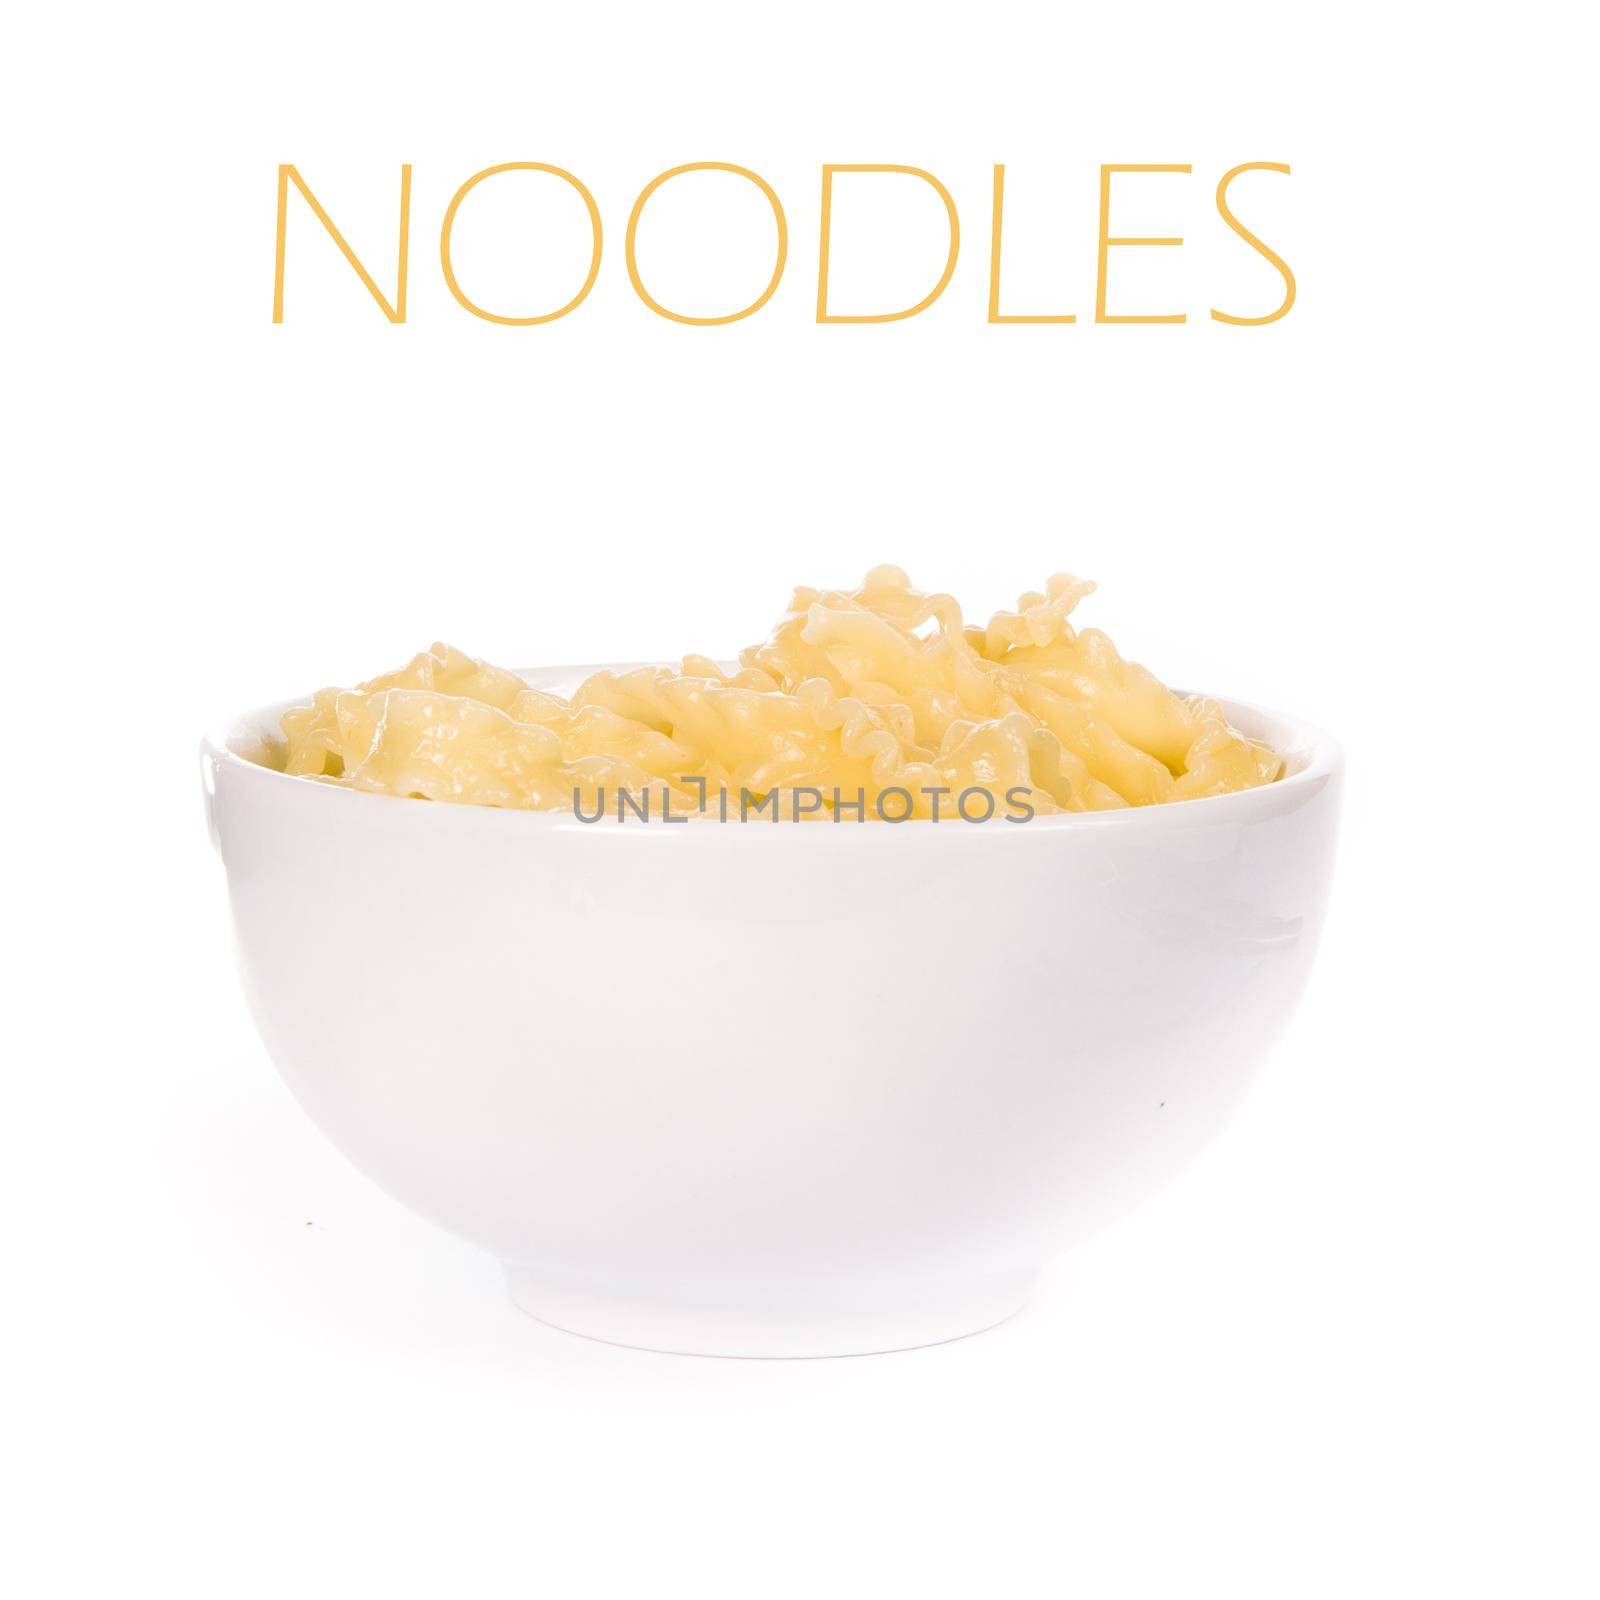 noodle in a bowl on white background